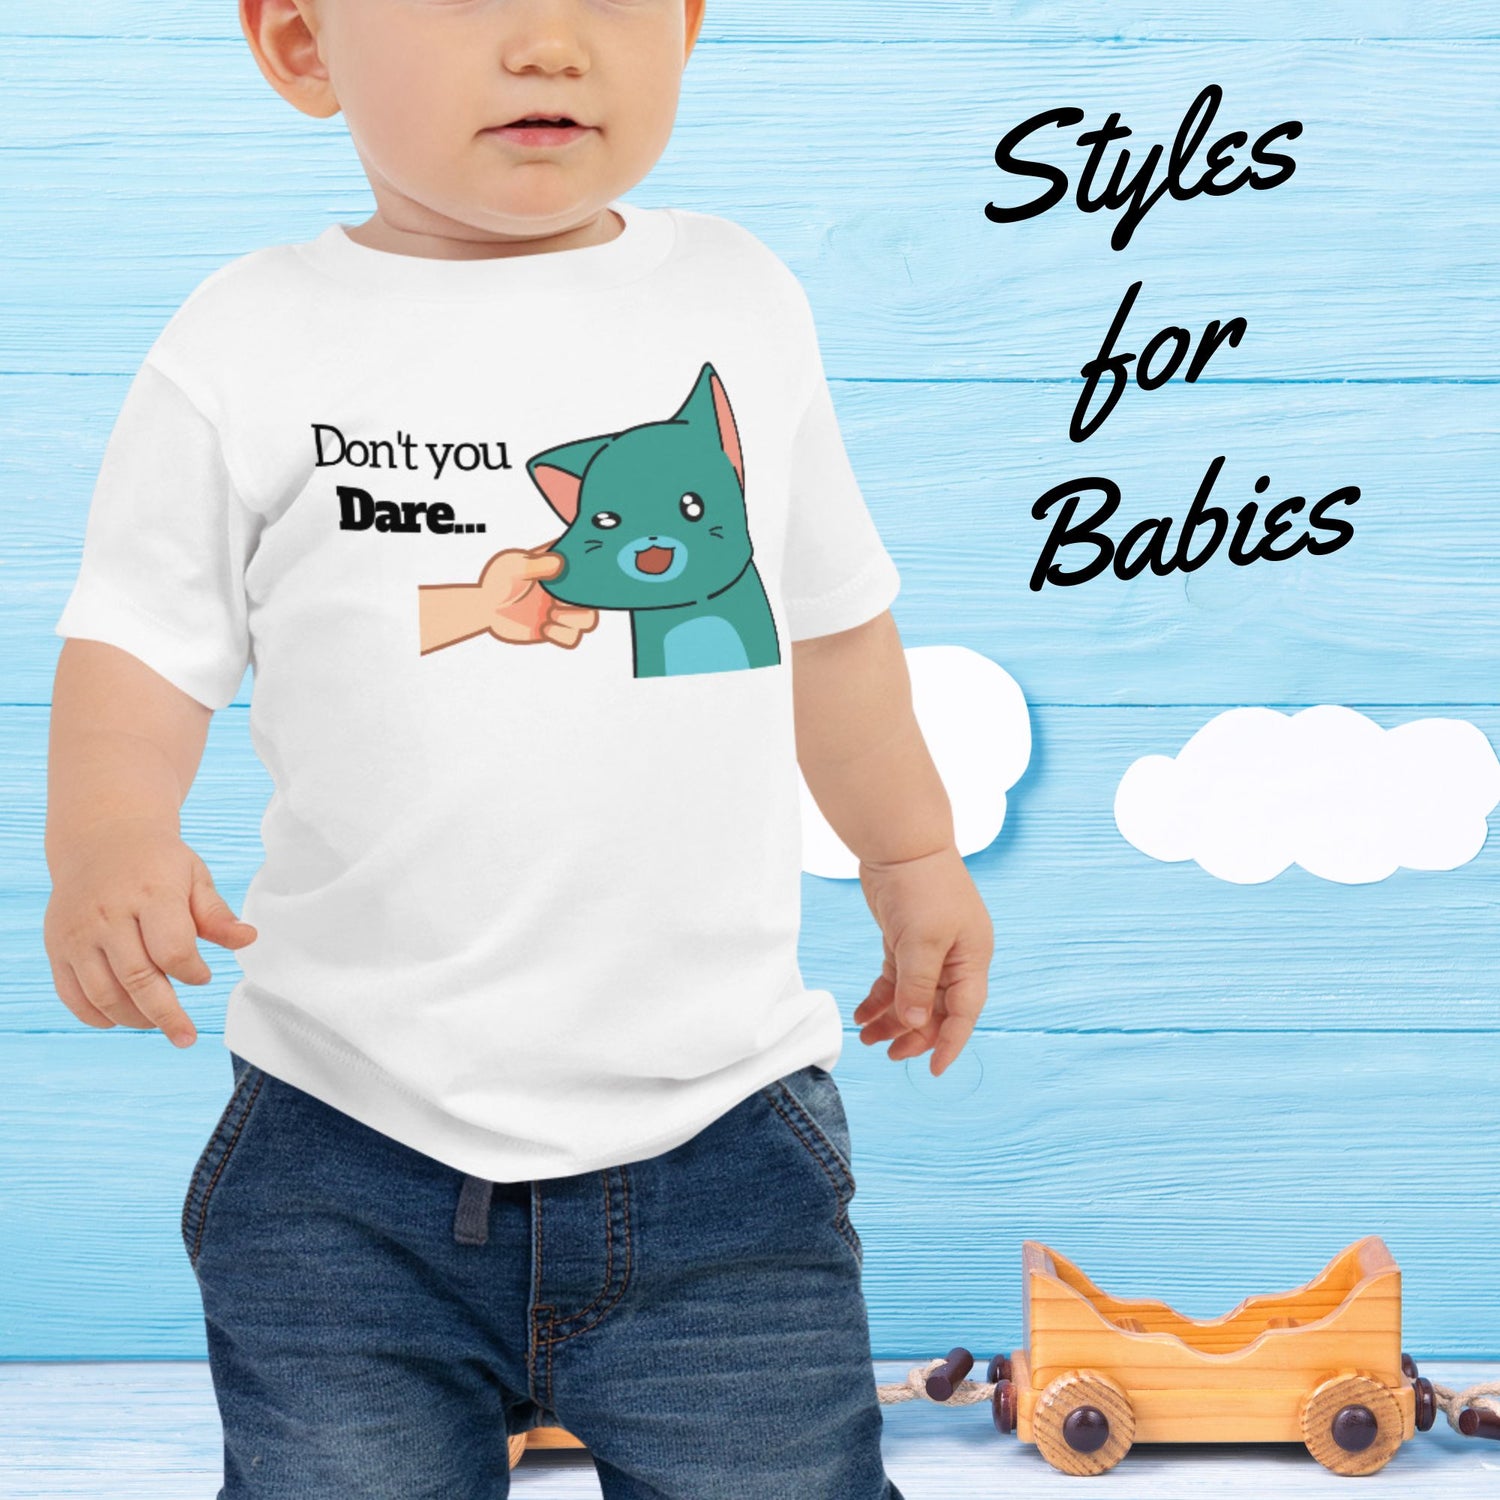 Styles for Babies